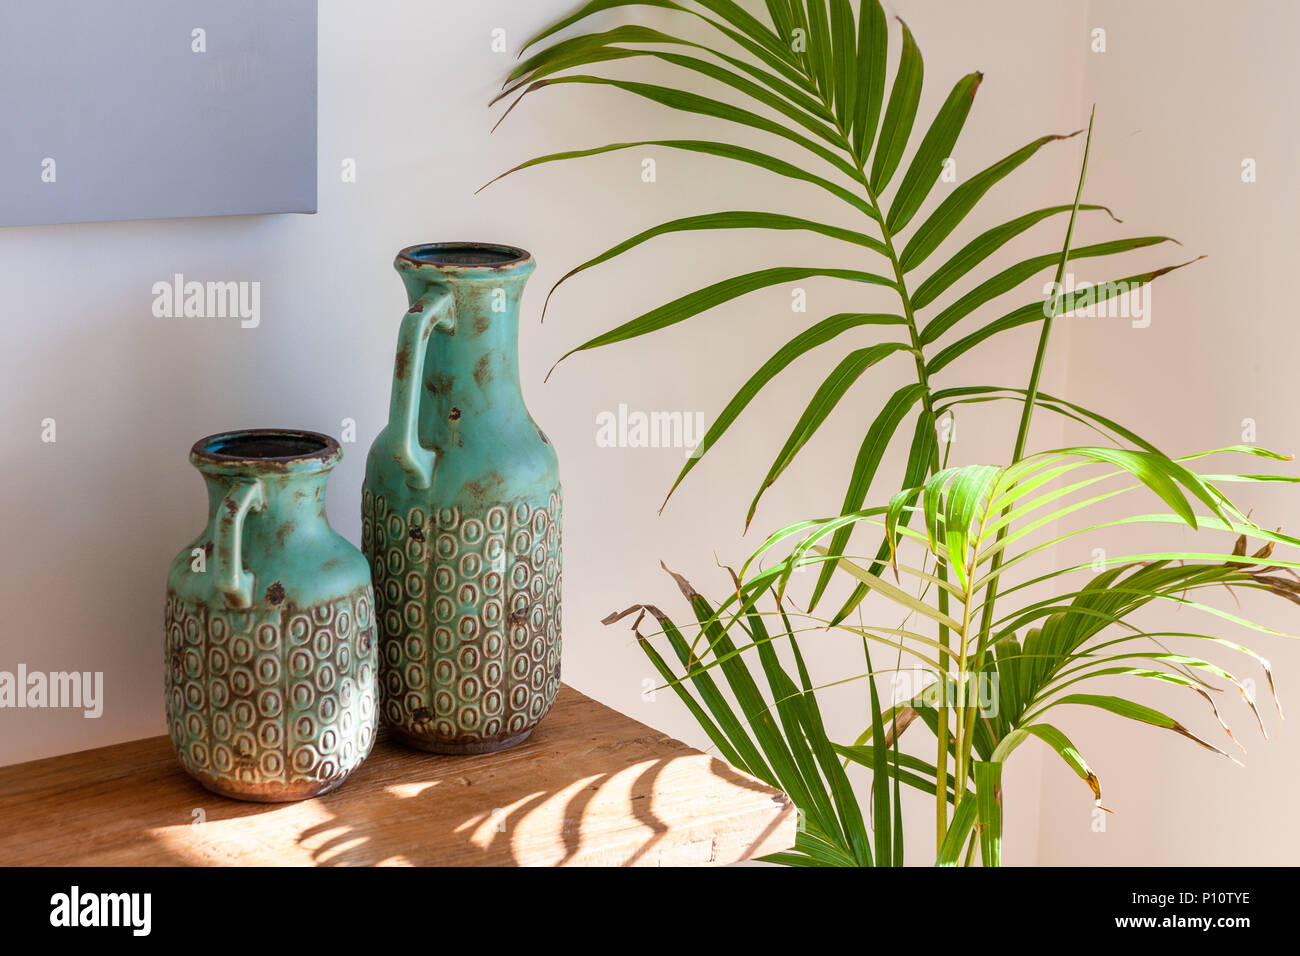 Two decorative vases on wooden table and Majesty Palm in sunlight - cozy home scene Stock Photo